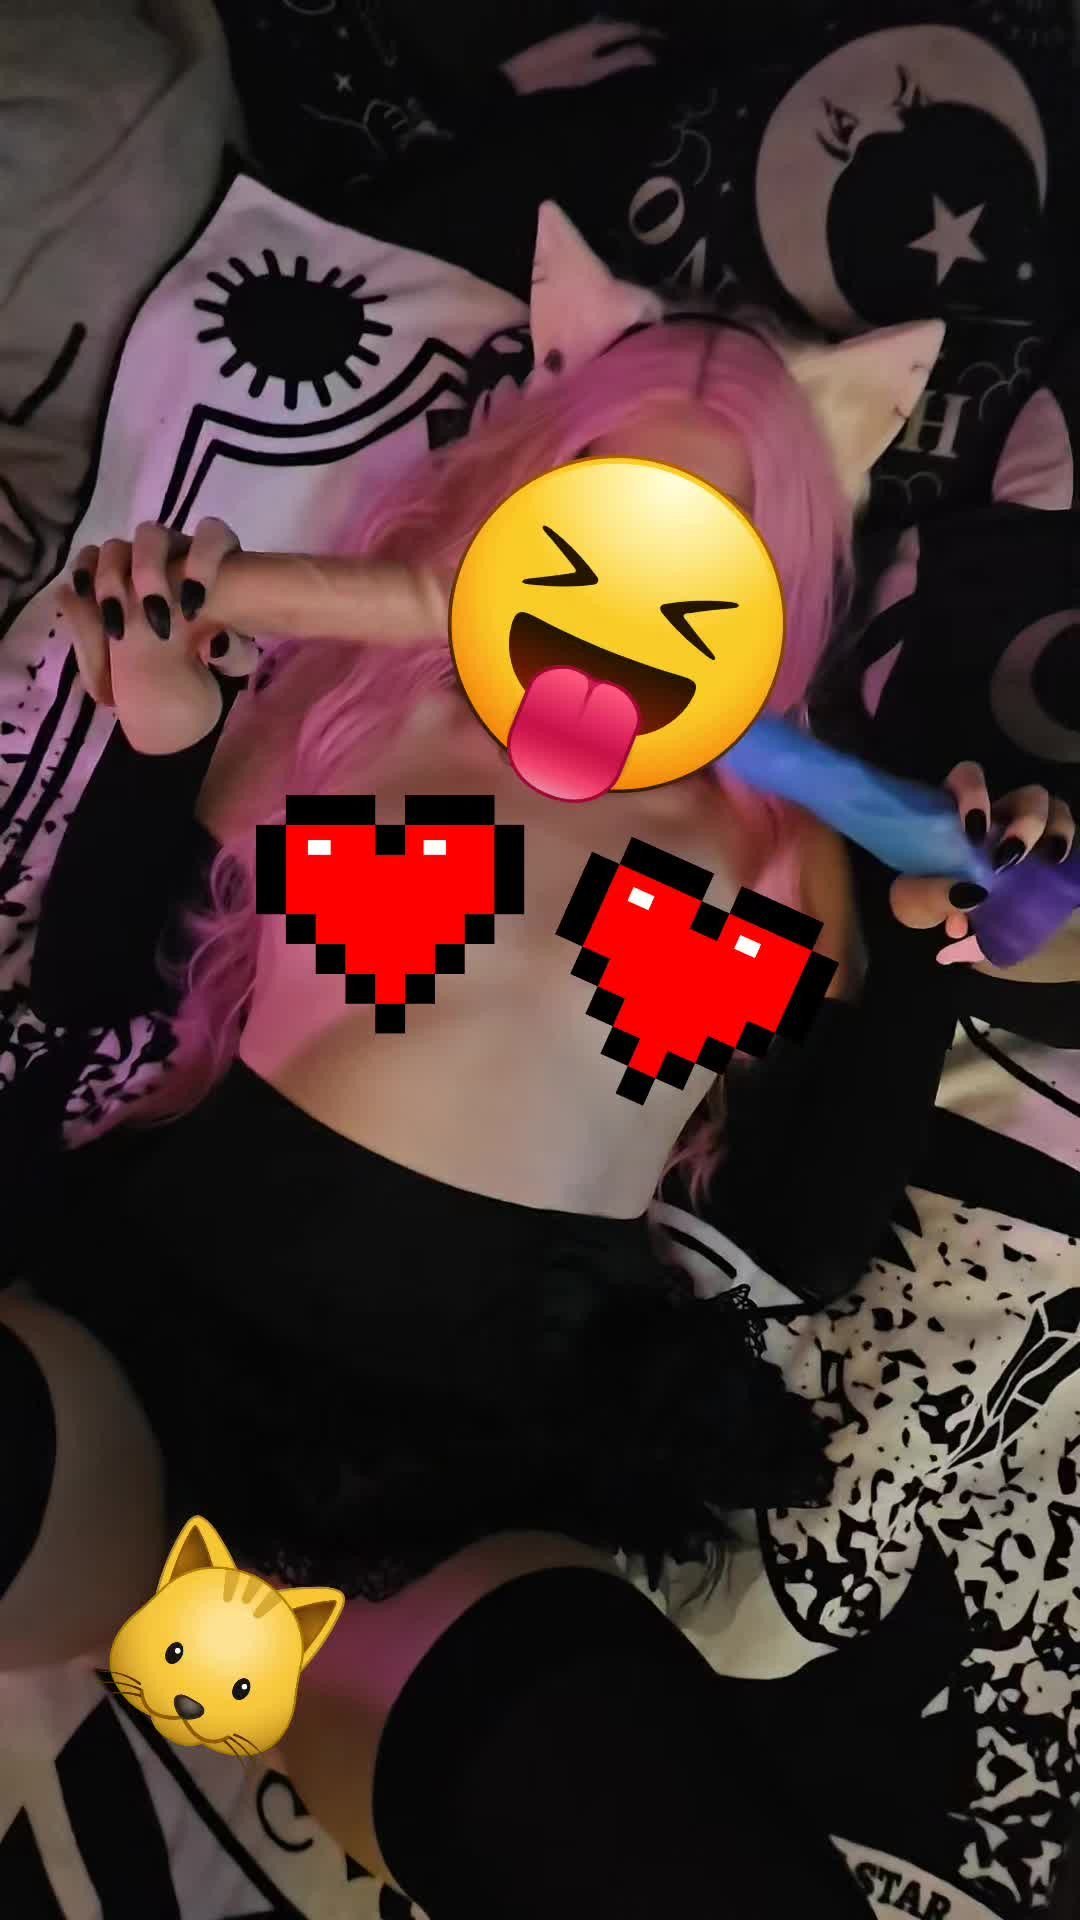 Video post by Crotchkitty